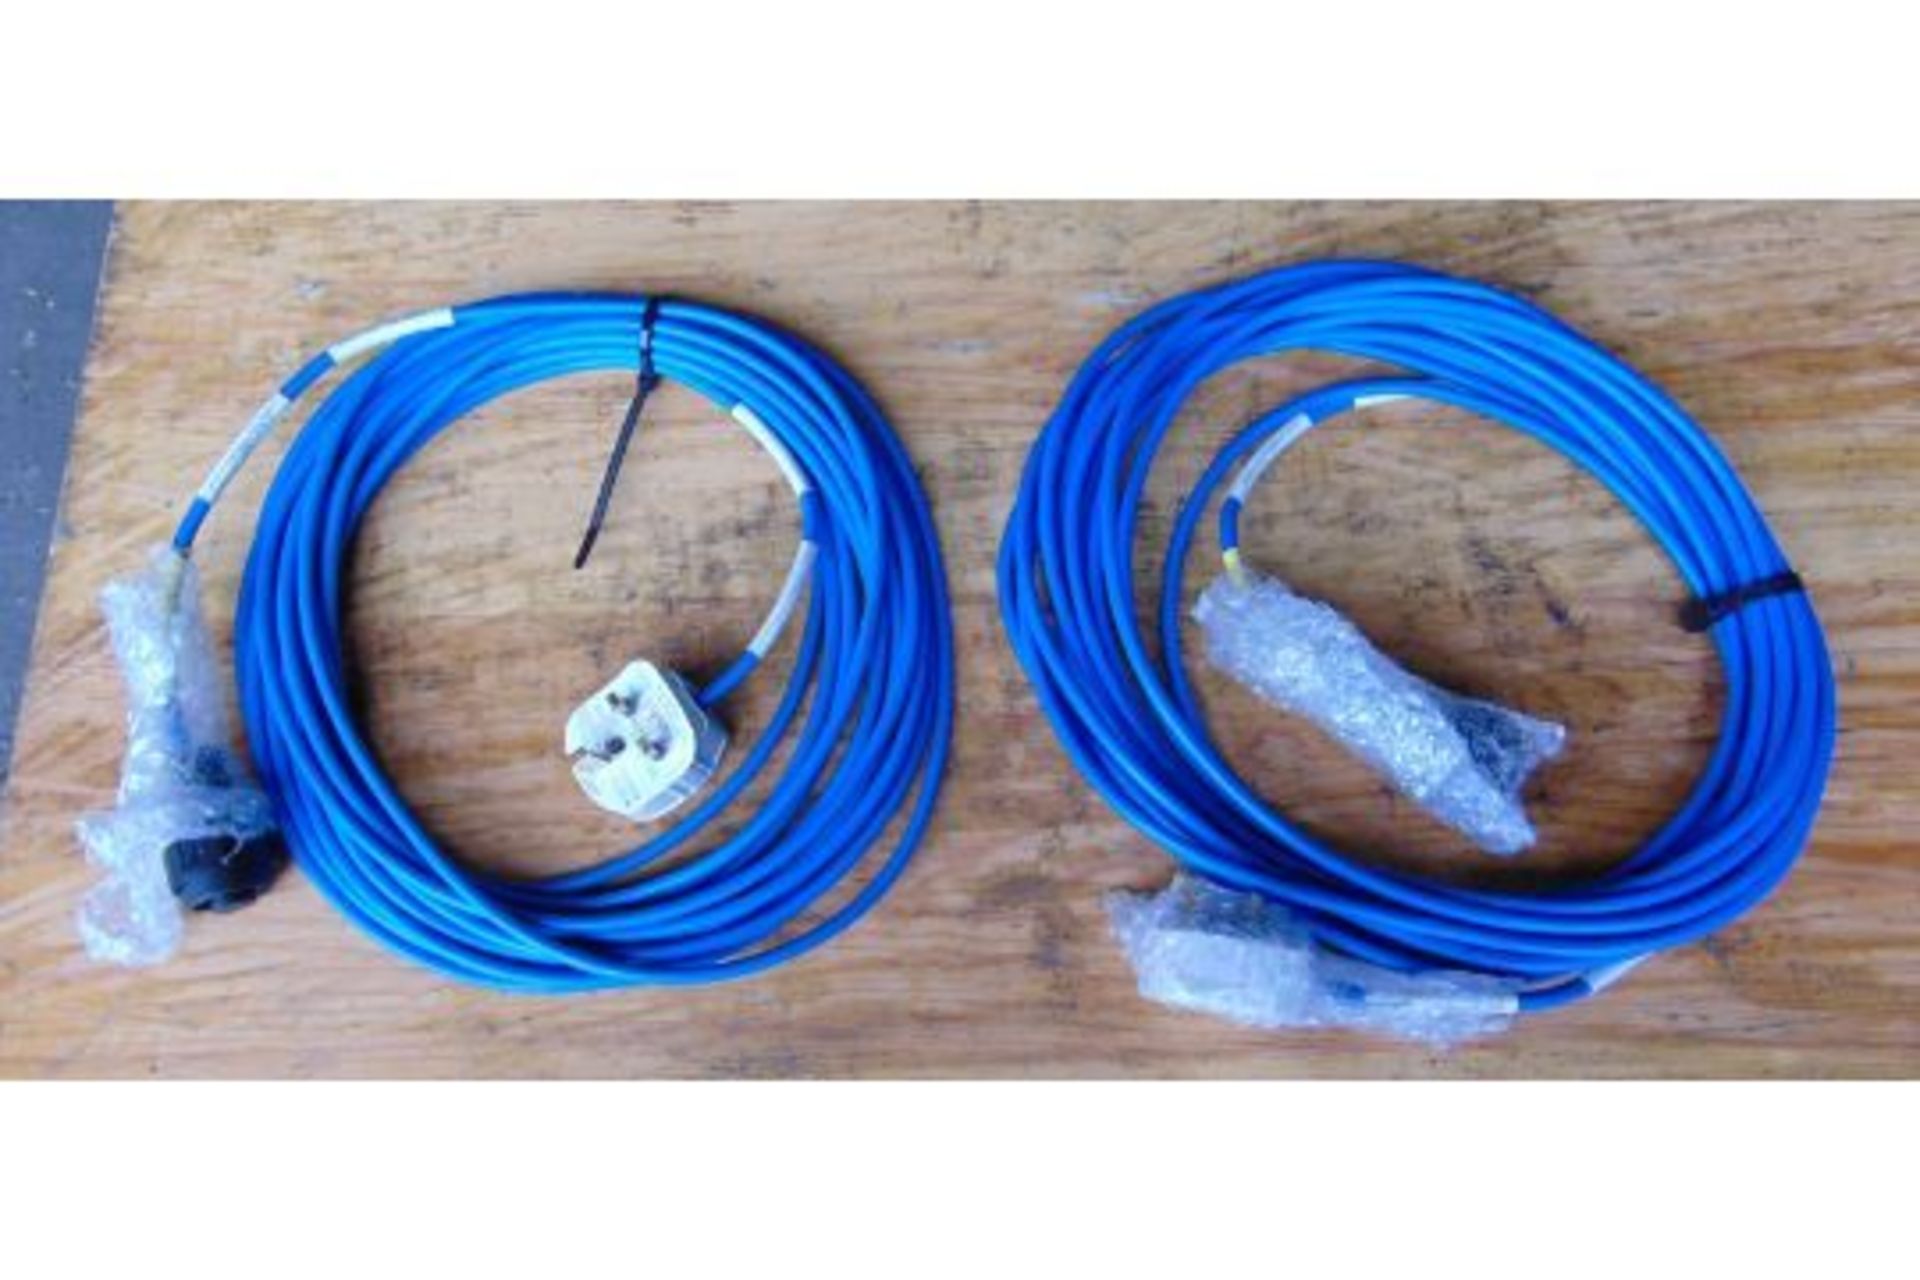 You are bidding on 2 x Extension Power Cables - Image 2 of 5